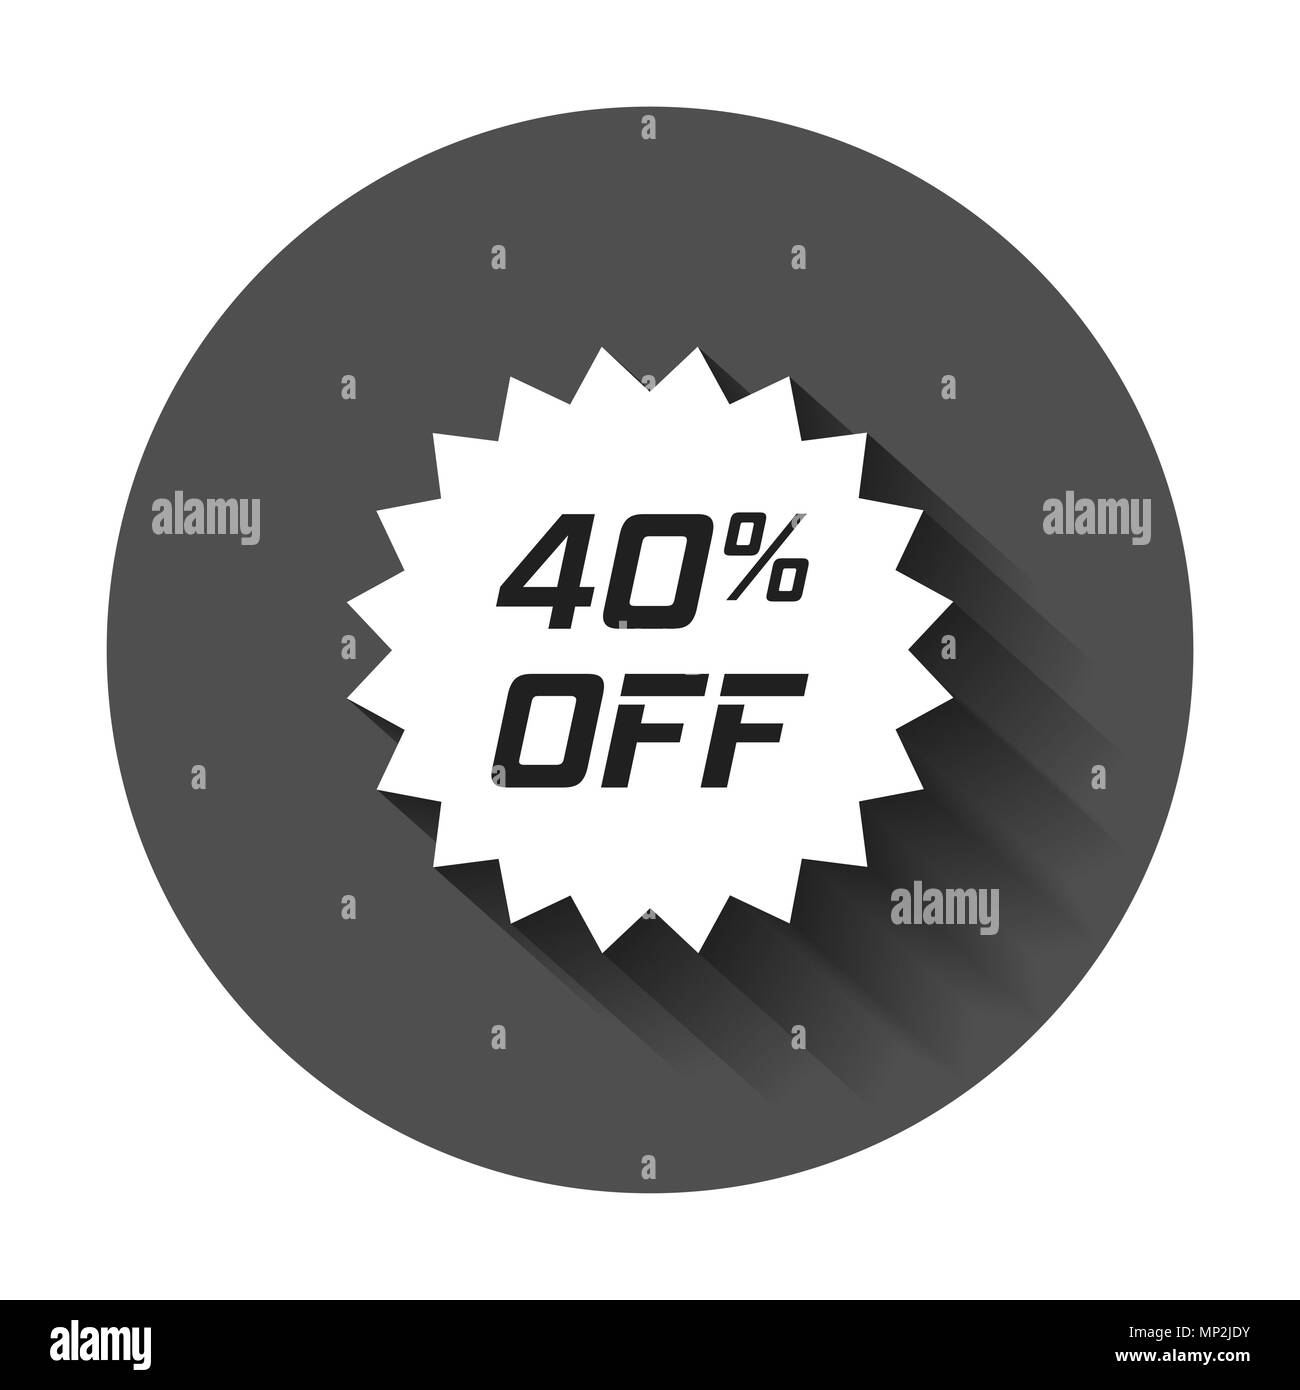 https://c8.alamy.com/comp/MP2JDY/discount-sticker-vector-icon-in-flat-style-sale-tag-sign-illustration-with-long-shadow-promotion-40-percent-discount-concept-MP2JDY.jpg